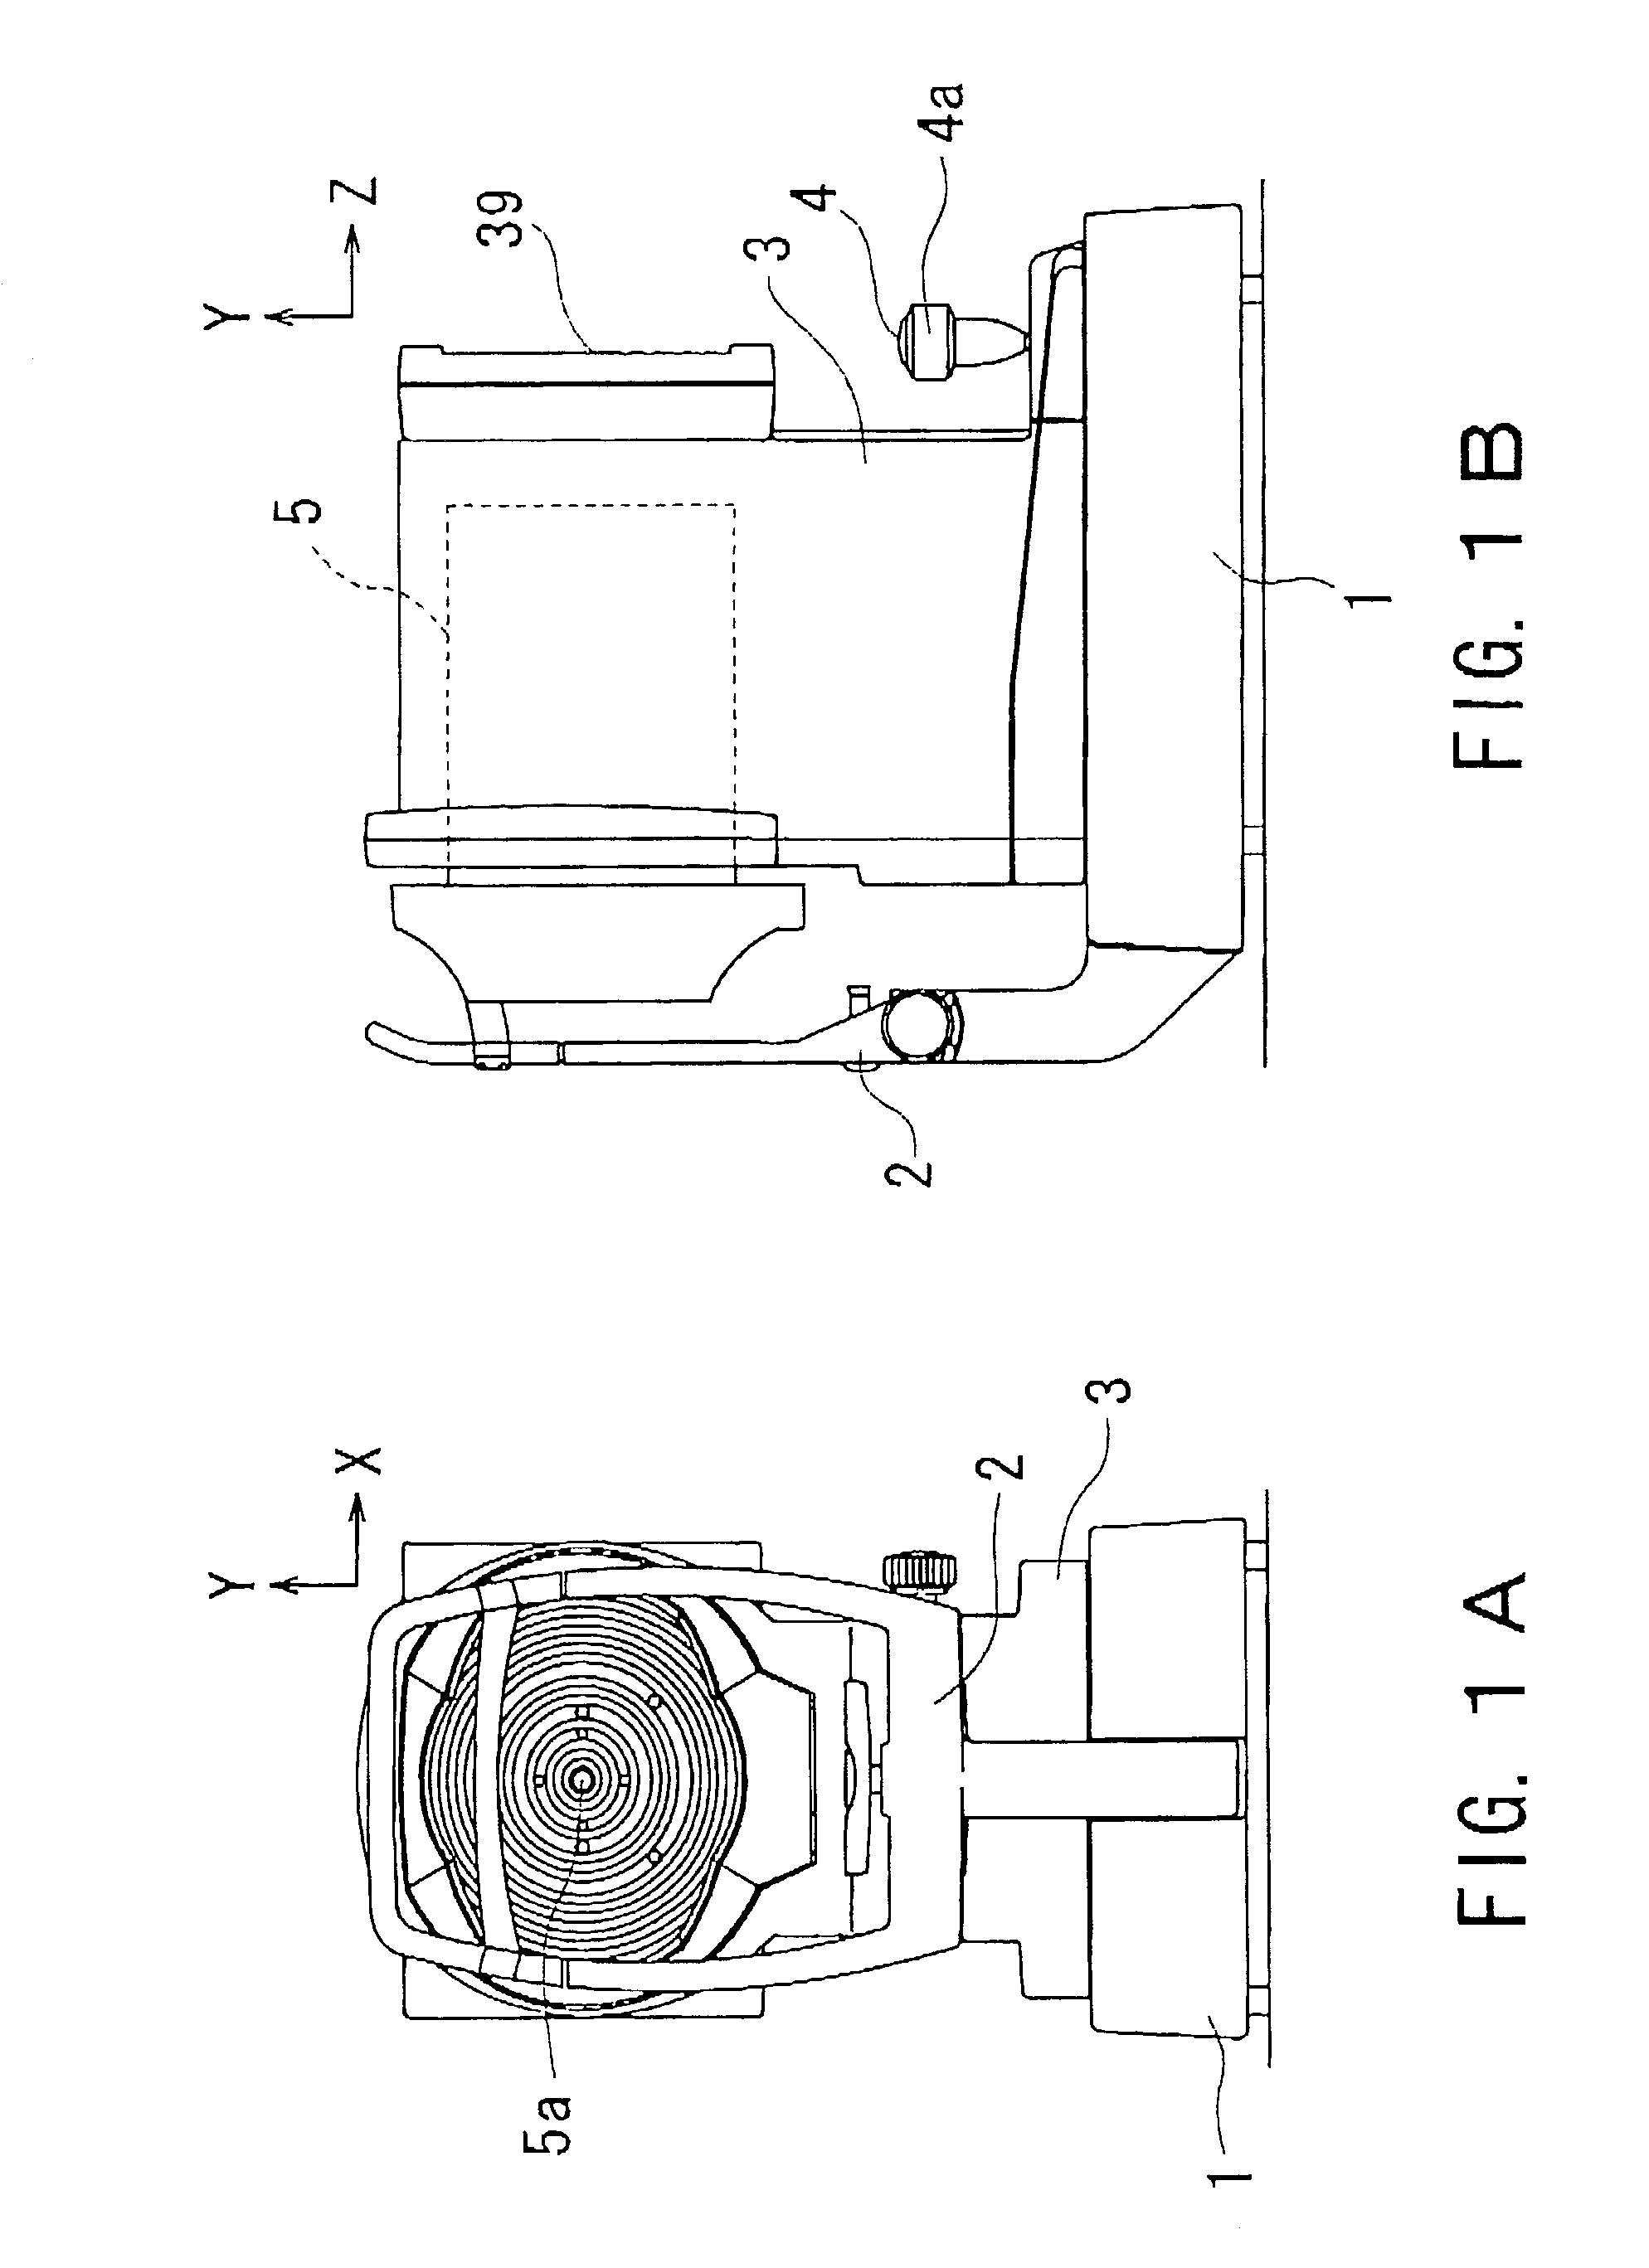 Ophthalmic apparatus and corneal surgery apparatus